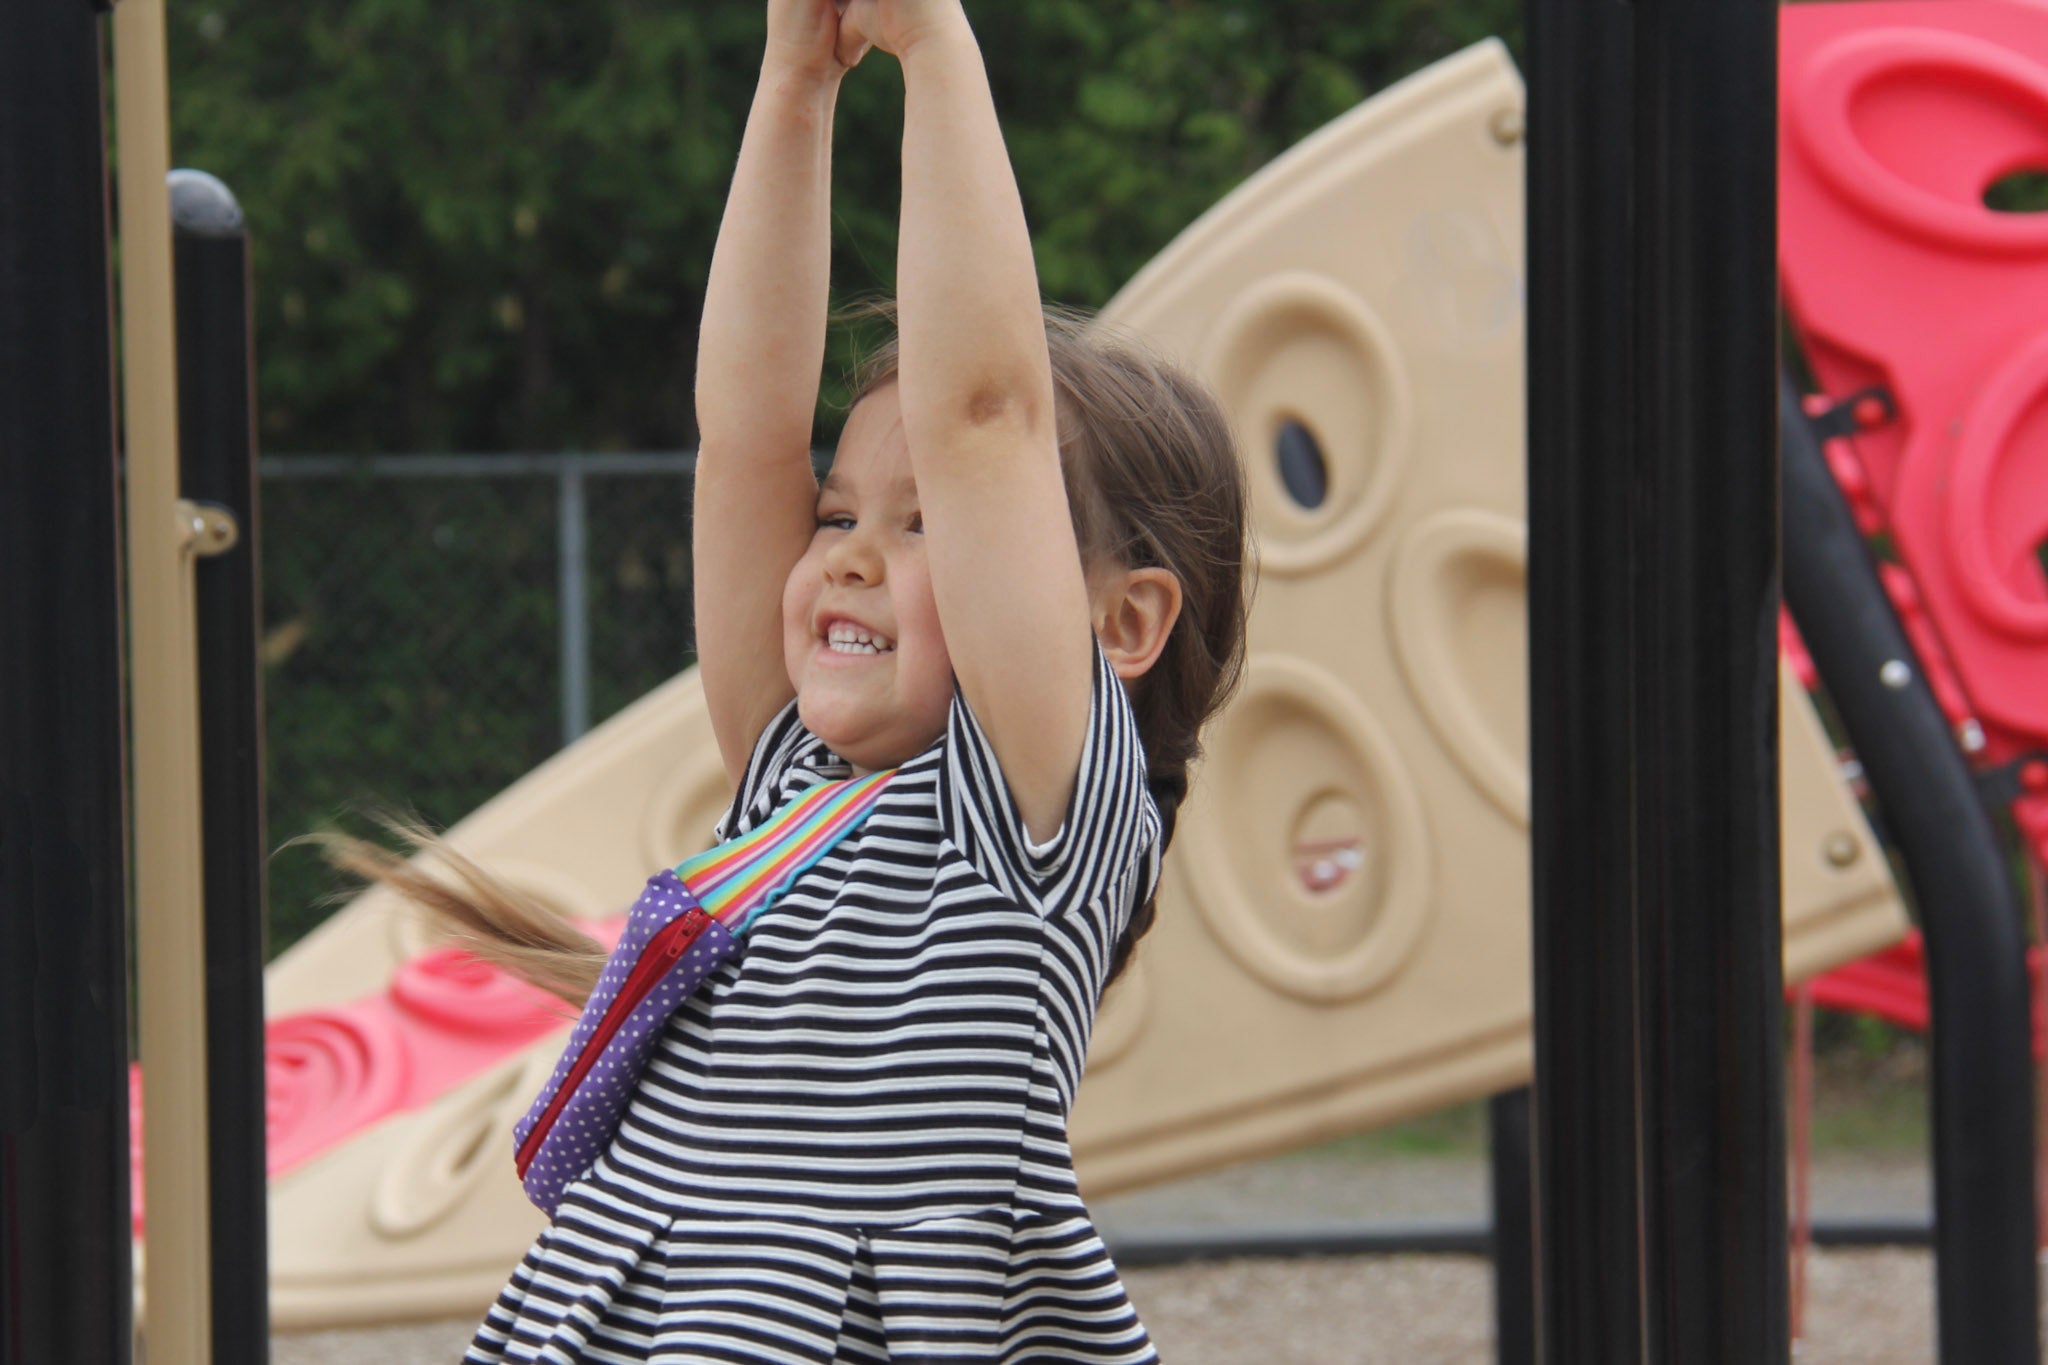 A child swinging on a play structure while wearing an epicute EpiPen / Allerject / Emerade case.